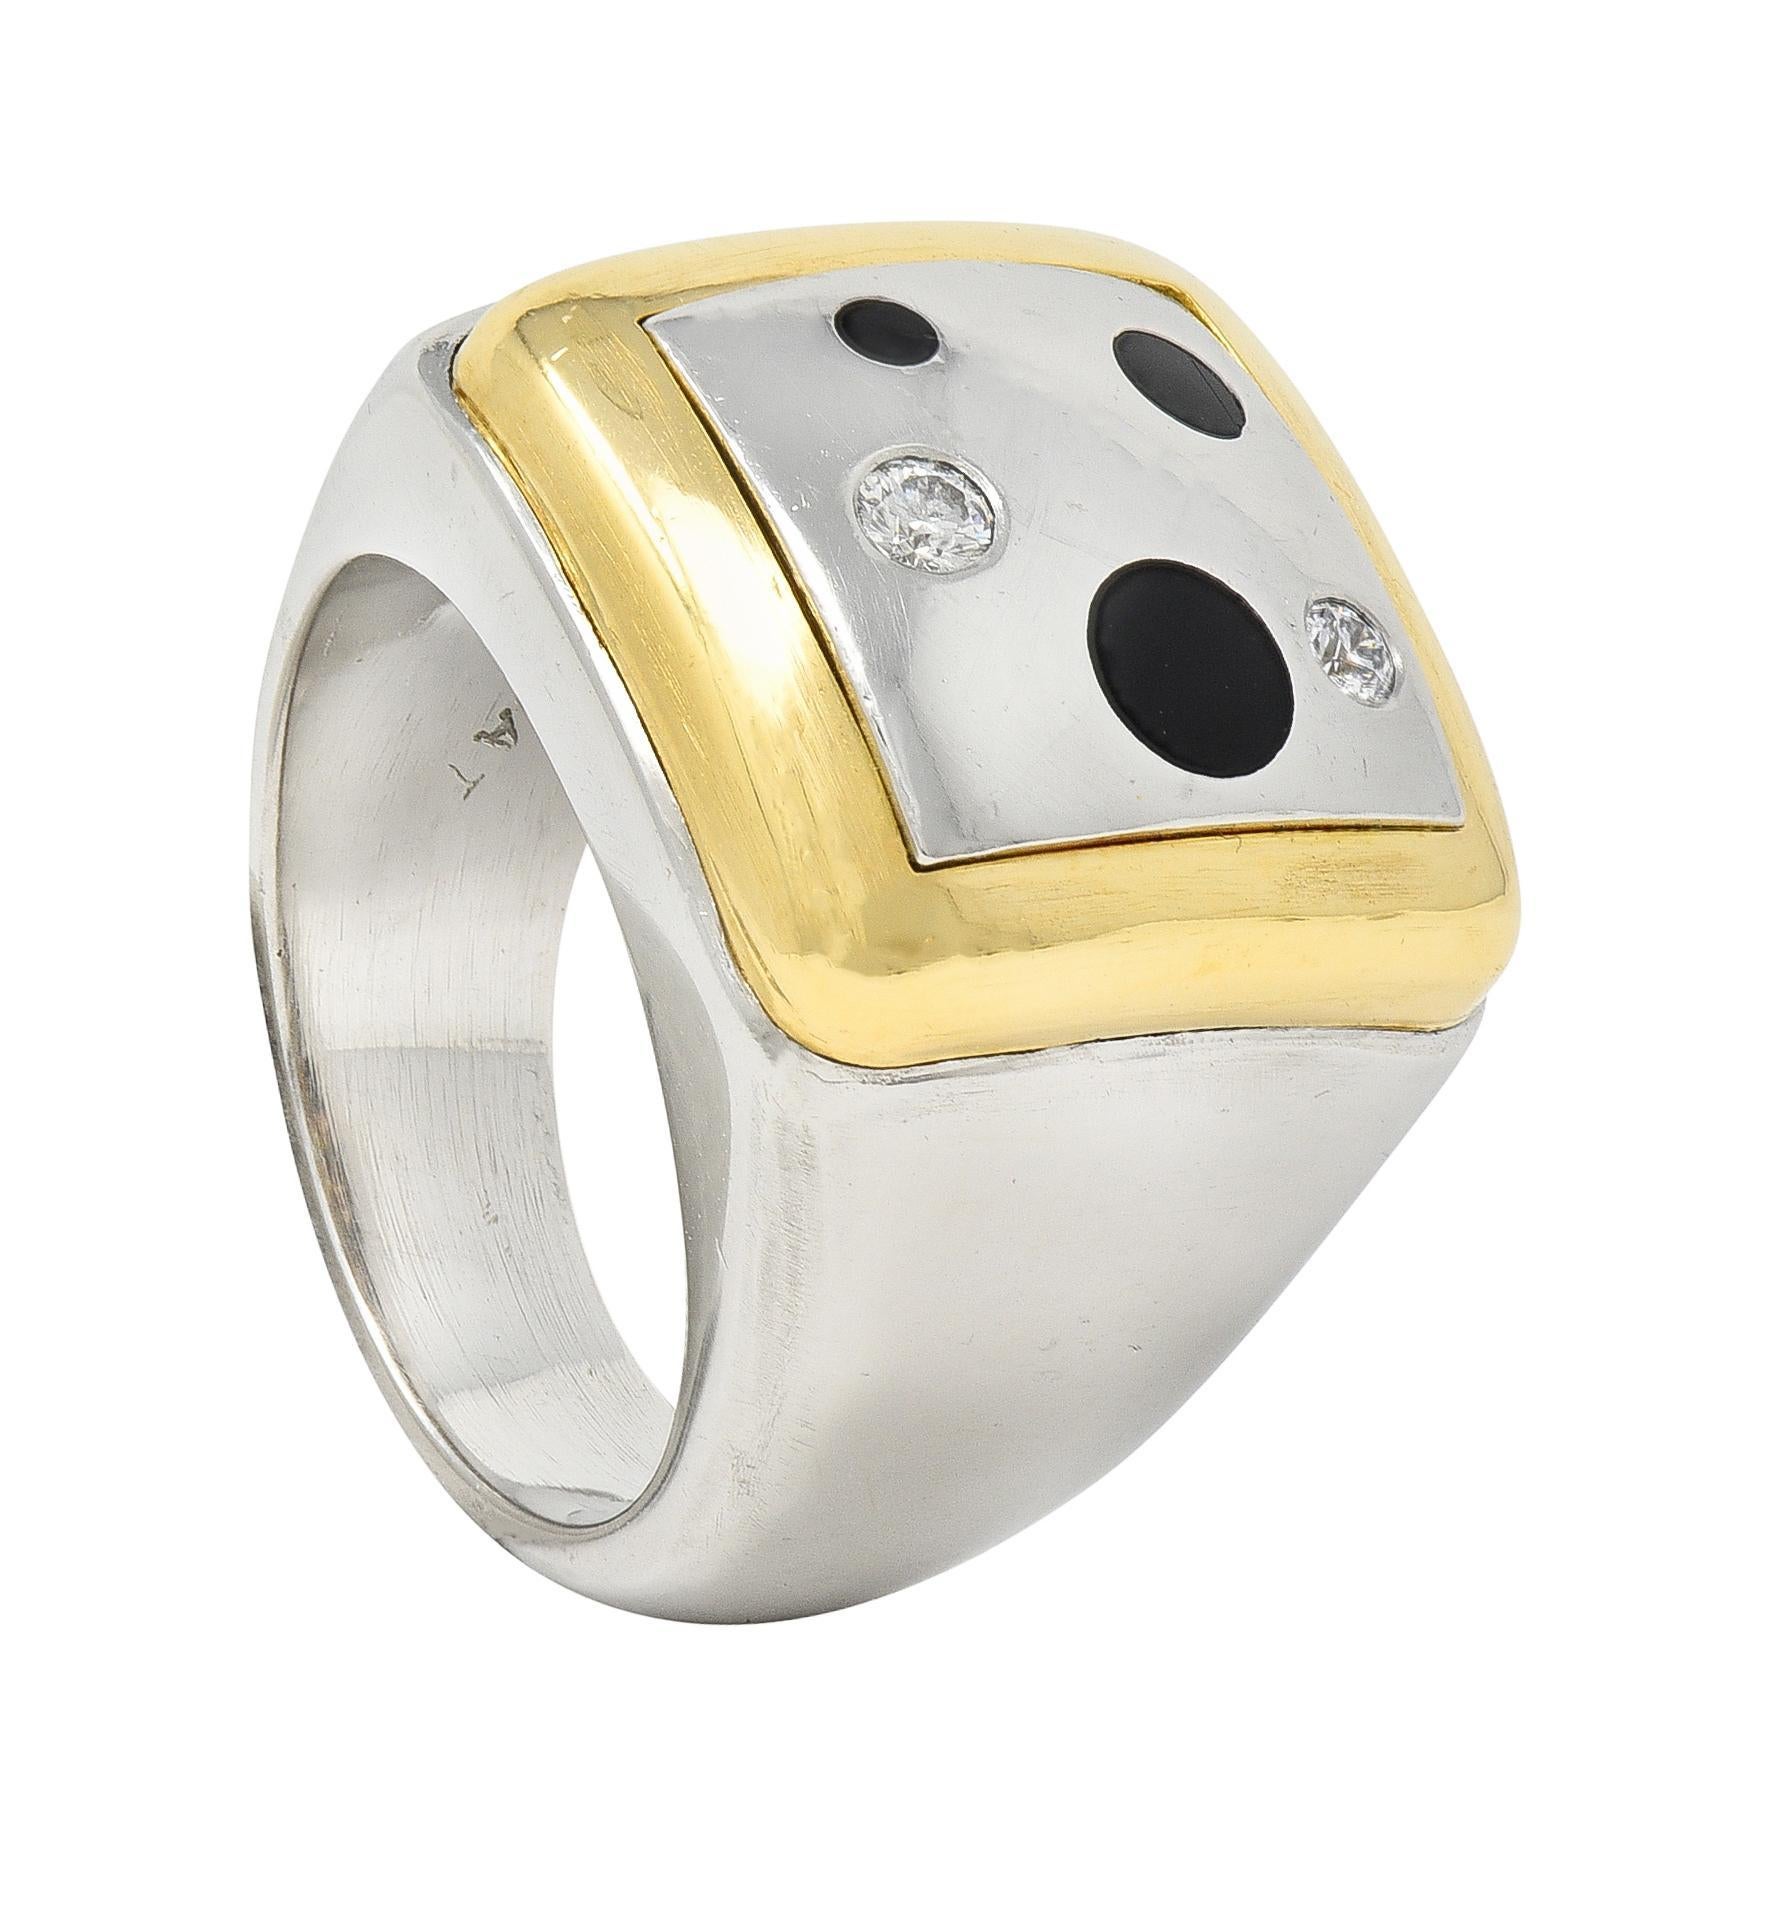 Designed a signet-style ring centering a platinum square with yellow gold surround 
Featuring a polka-dot motif comprised of inlaid onyx circles and diamonds
Onyx measures between 2.0 to 4.0 mm and is opaque glossy black
Diamonds are round brilliant